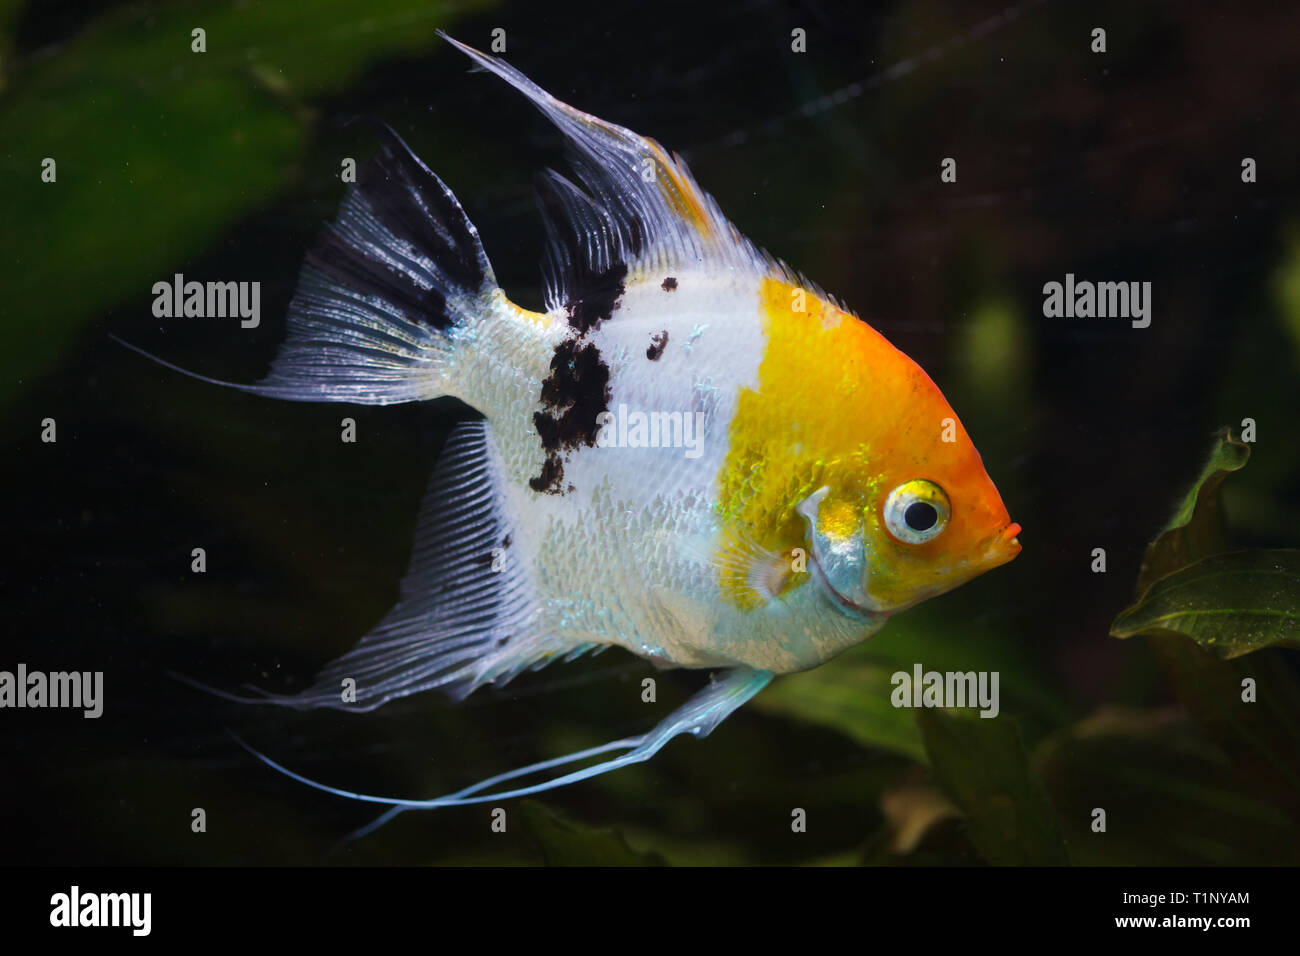 Angelfish (Pterophyllum scalare), also known as the freshwater angelfish. Stock Photo